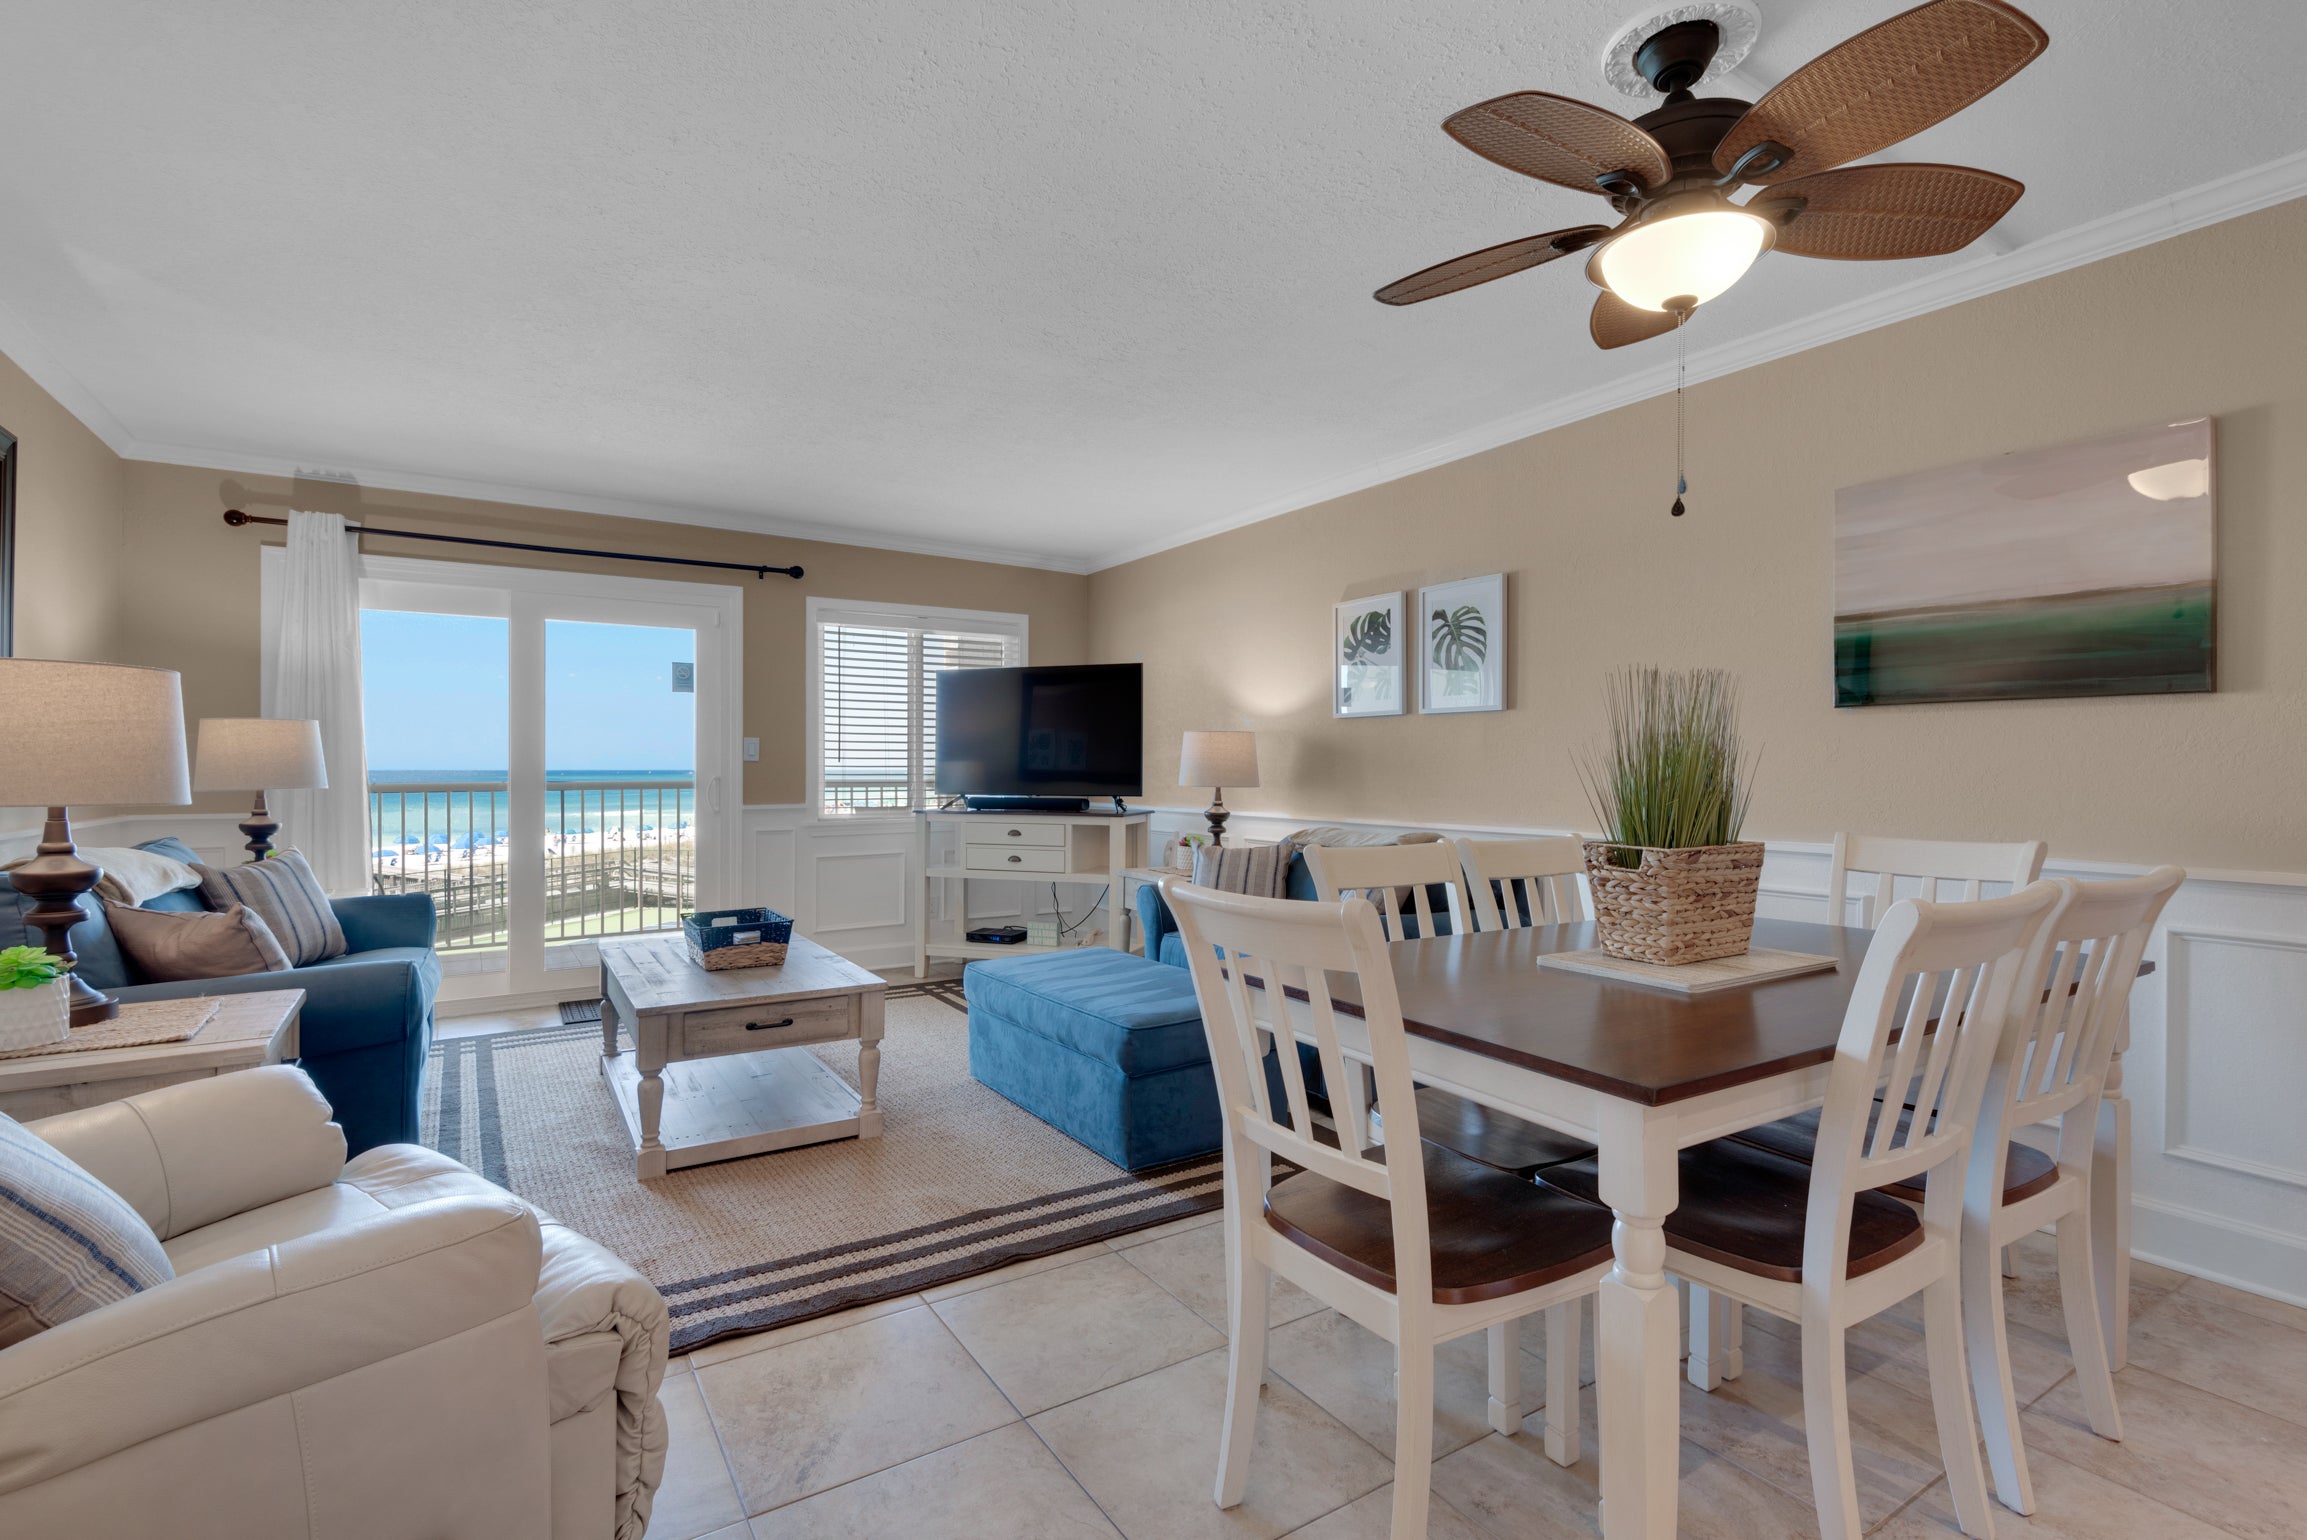 Beach Views even from the Dining Area!